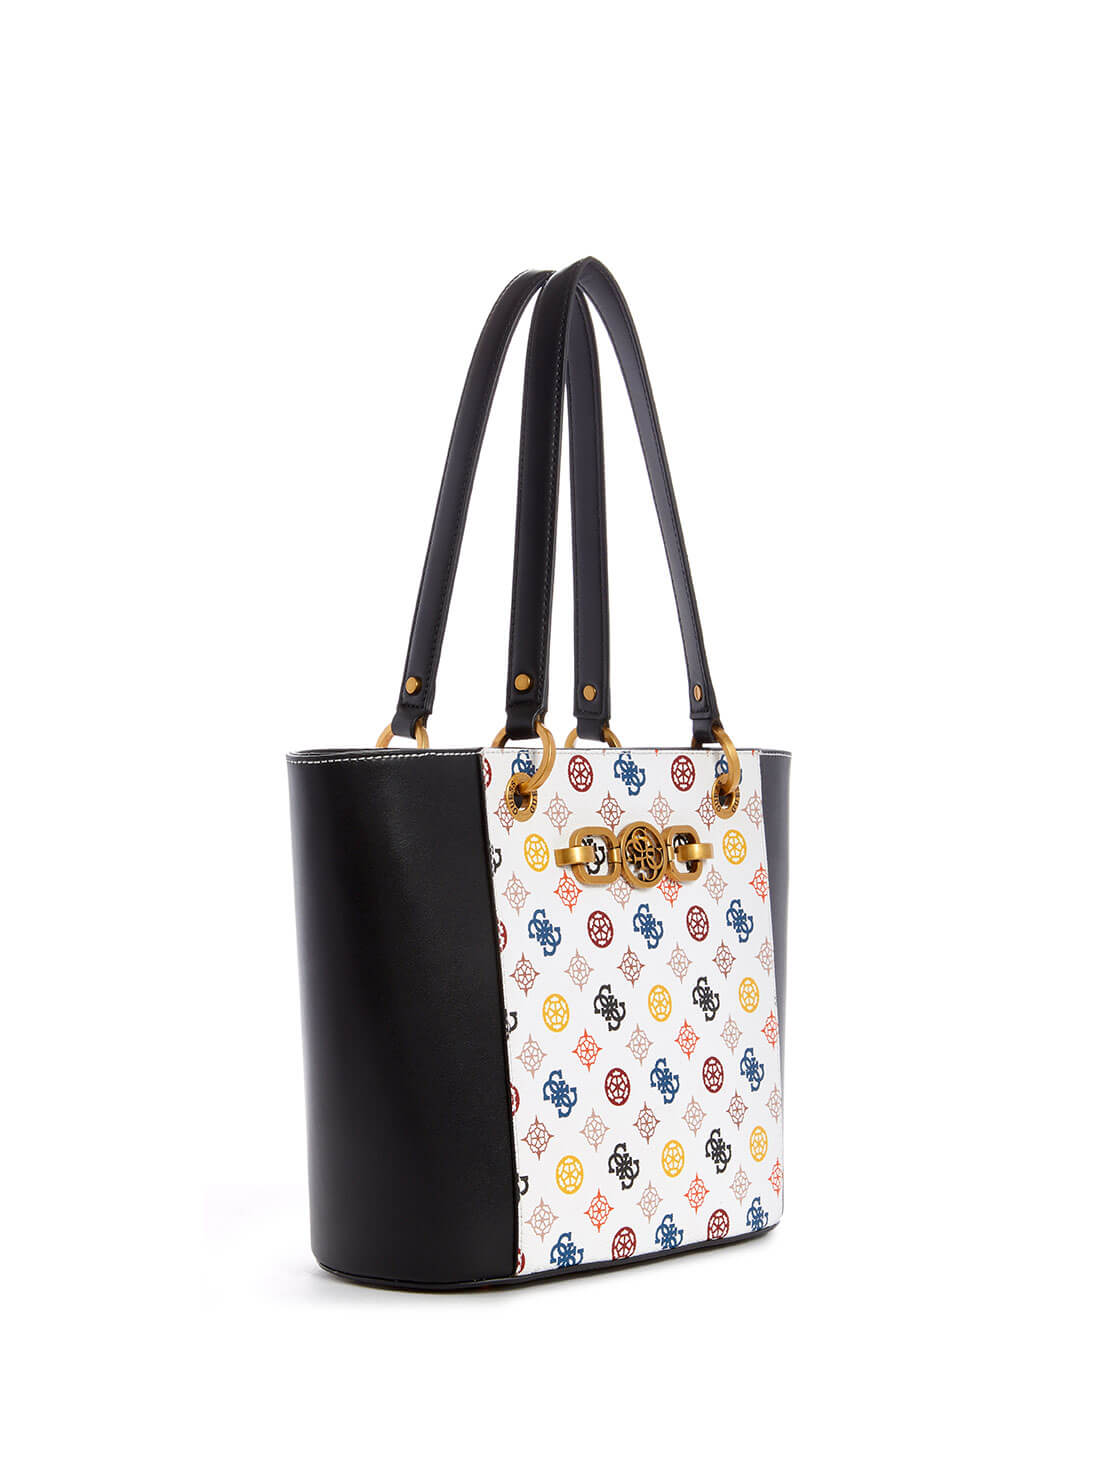 GUESS Womens White Multi Noelle Small Elite Tote Bag PW787922 Front Side View